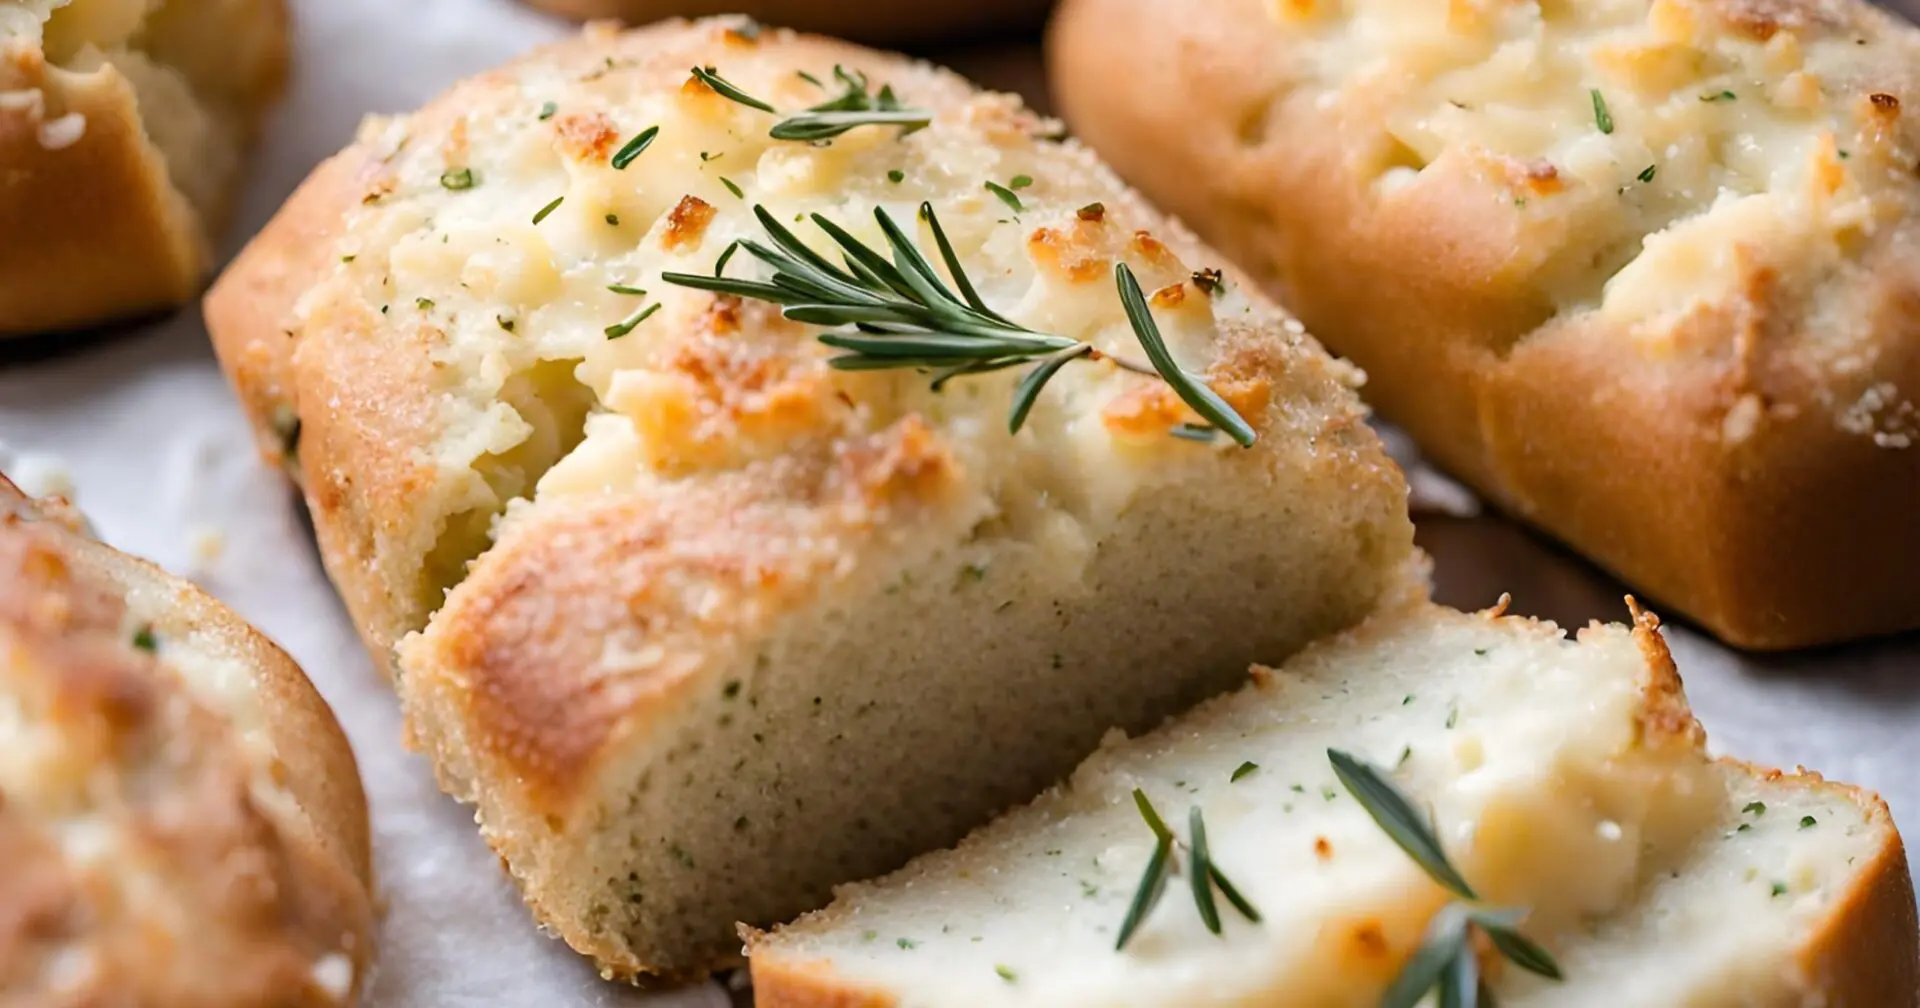 How To Bake Rosemary Parmesan Bread At Home In 9 Simple Steps